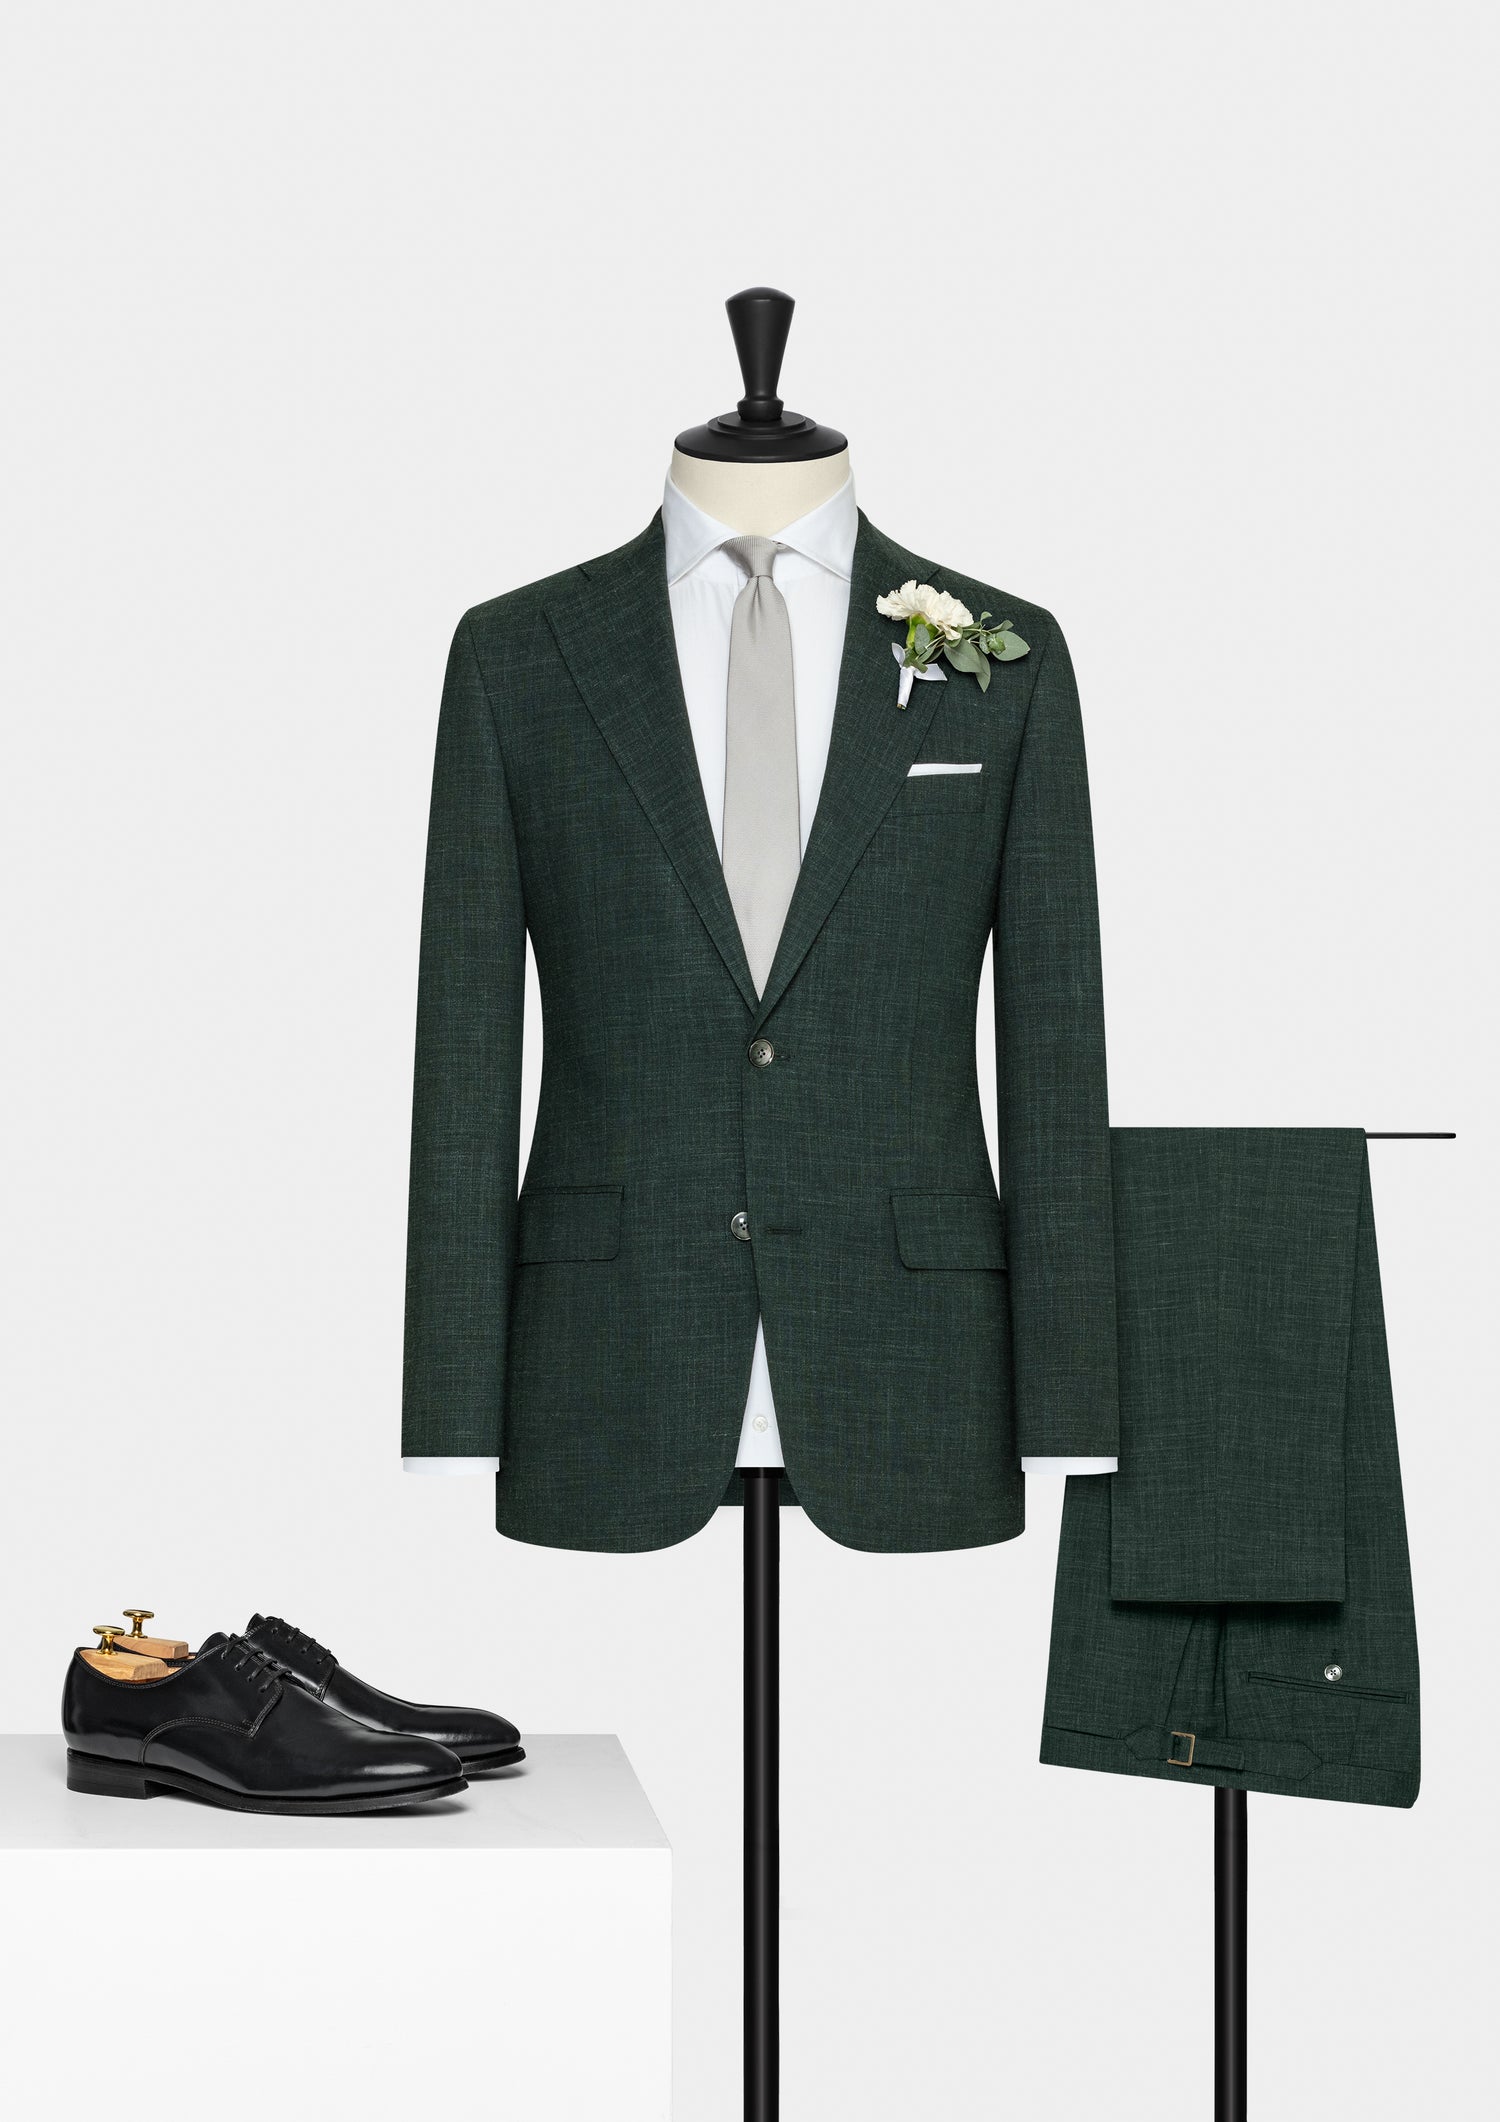 Three Great Options For Your Wedding Suit